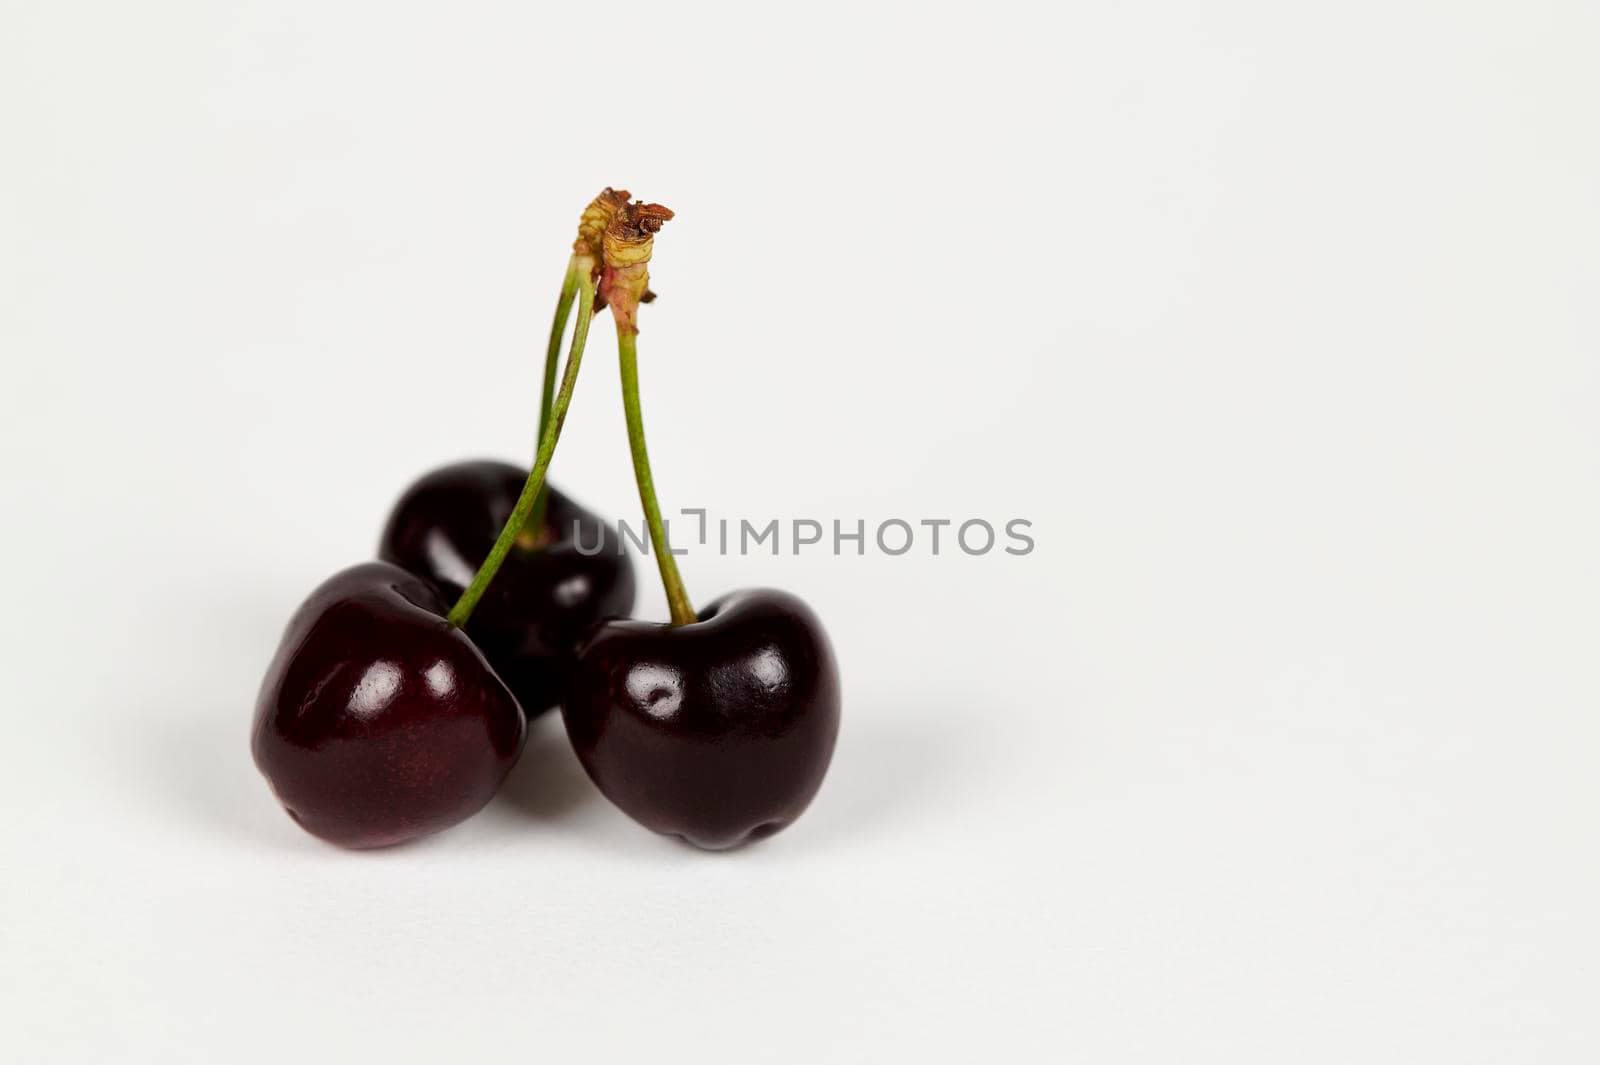 Close up of three Indian Cherries on a white background